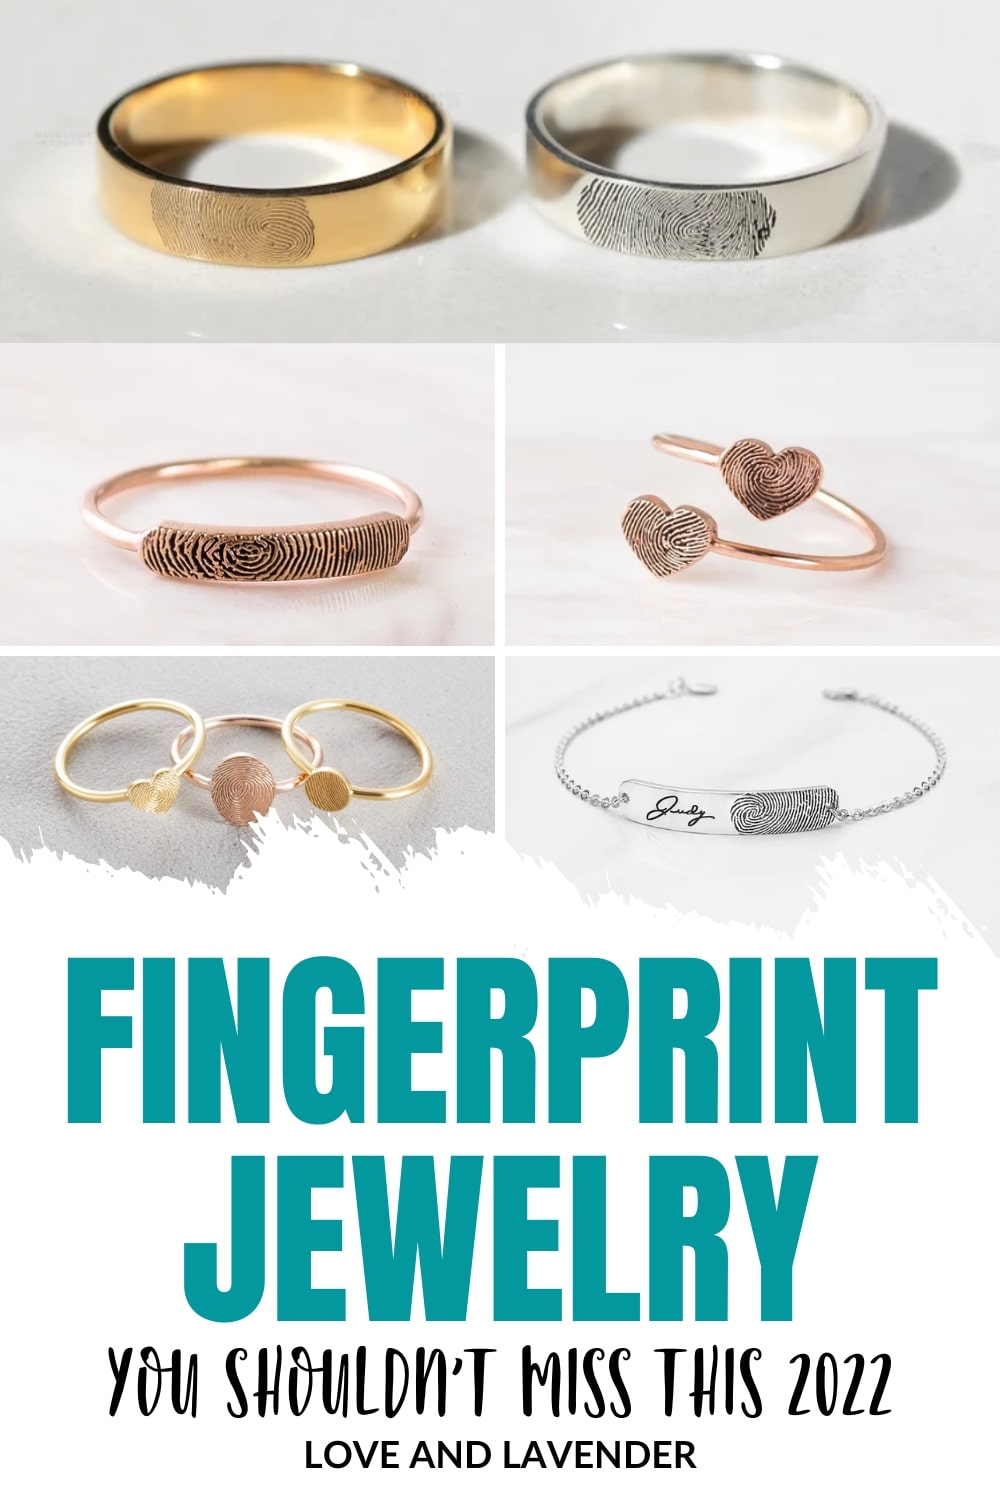 16 Fingerprint Jewelry Ideas to Keep Your Loved Ones Close